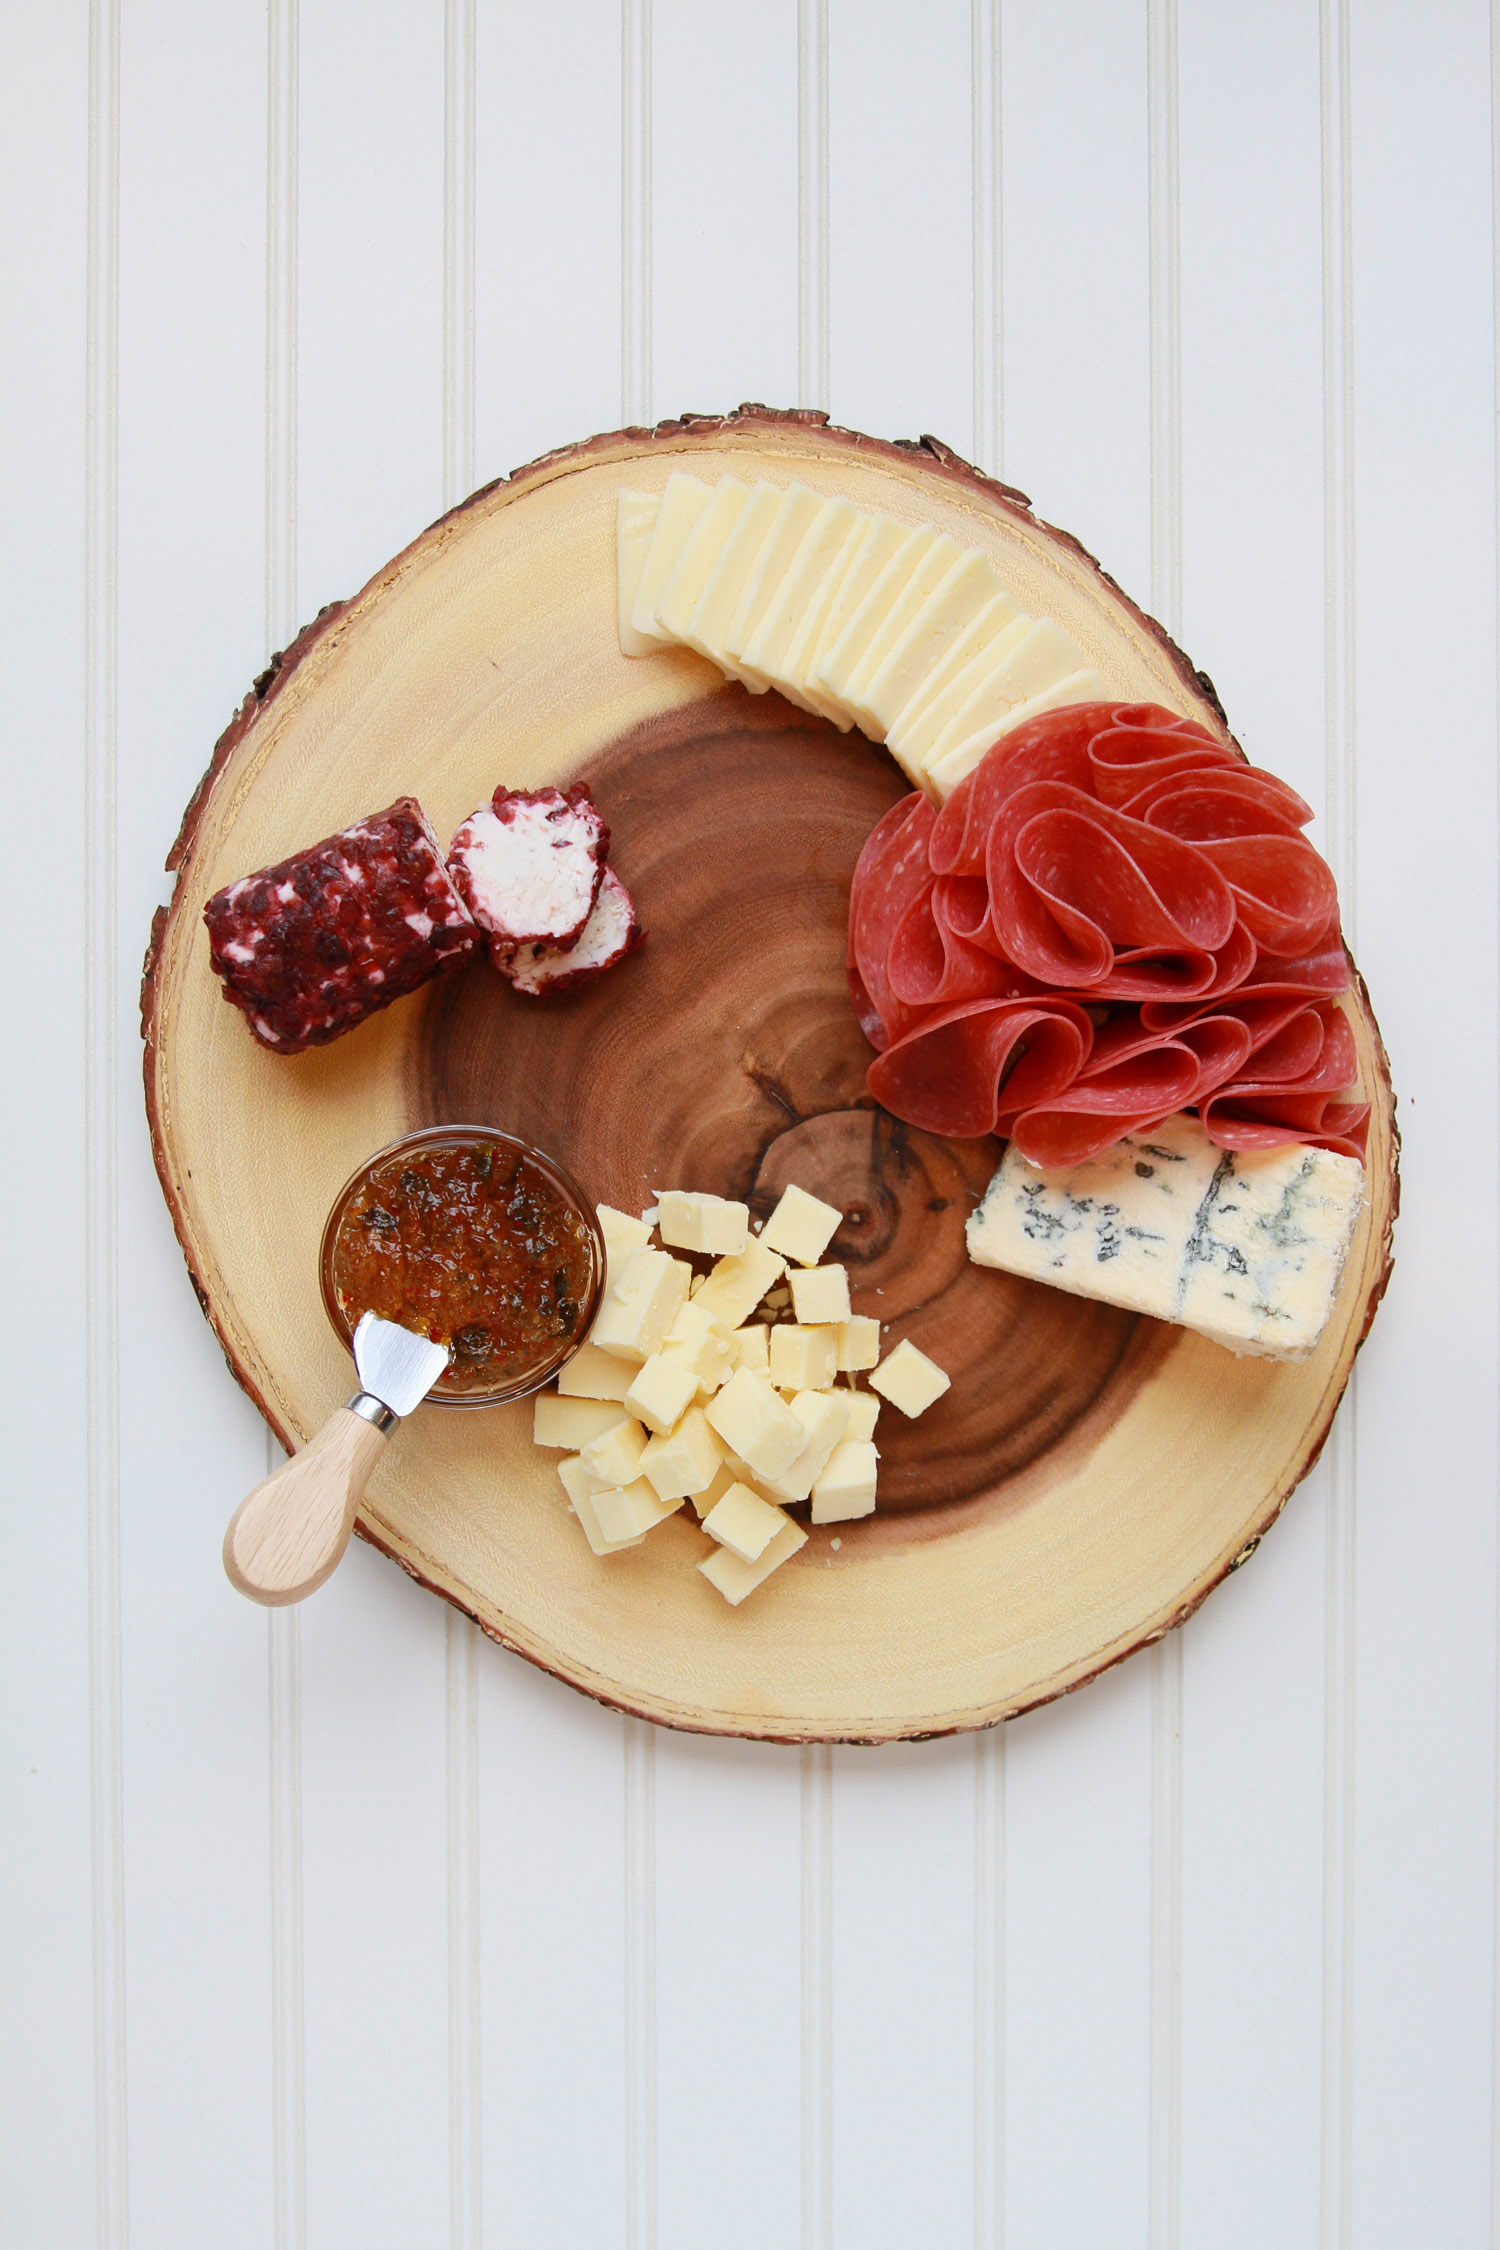 5 Steps to Building the Perfect Holiday Cheese Board